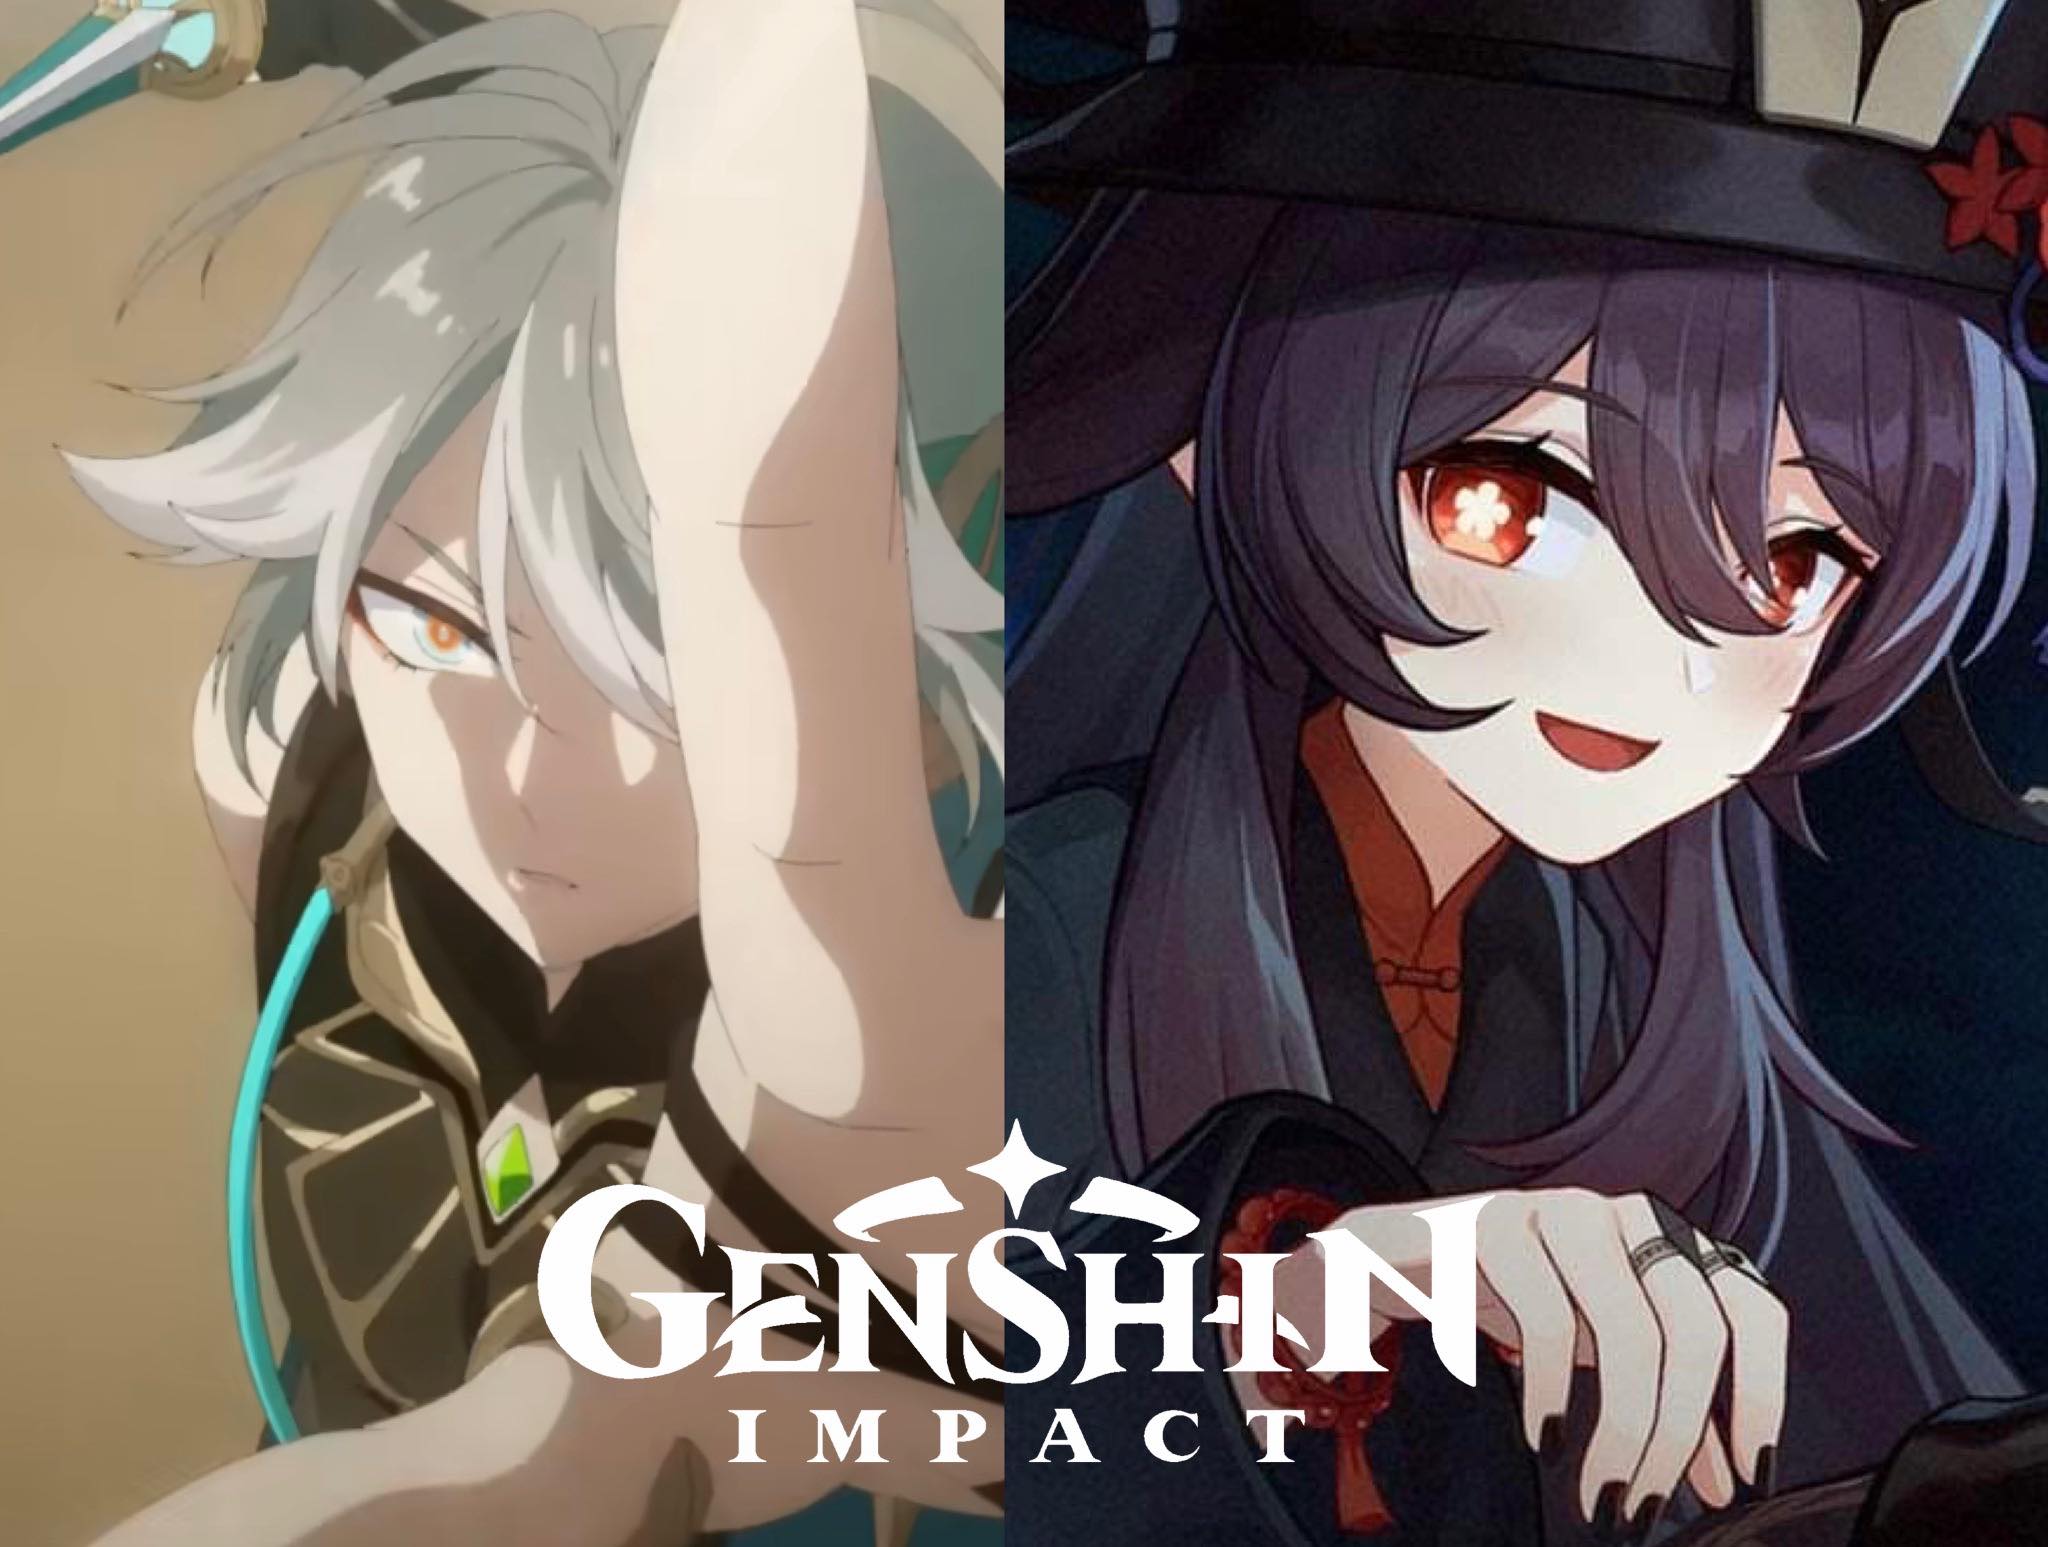 Genshin Impact 3.4: Release date, characters, and new region